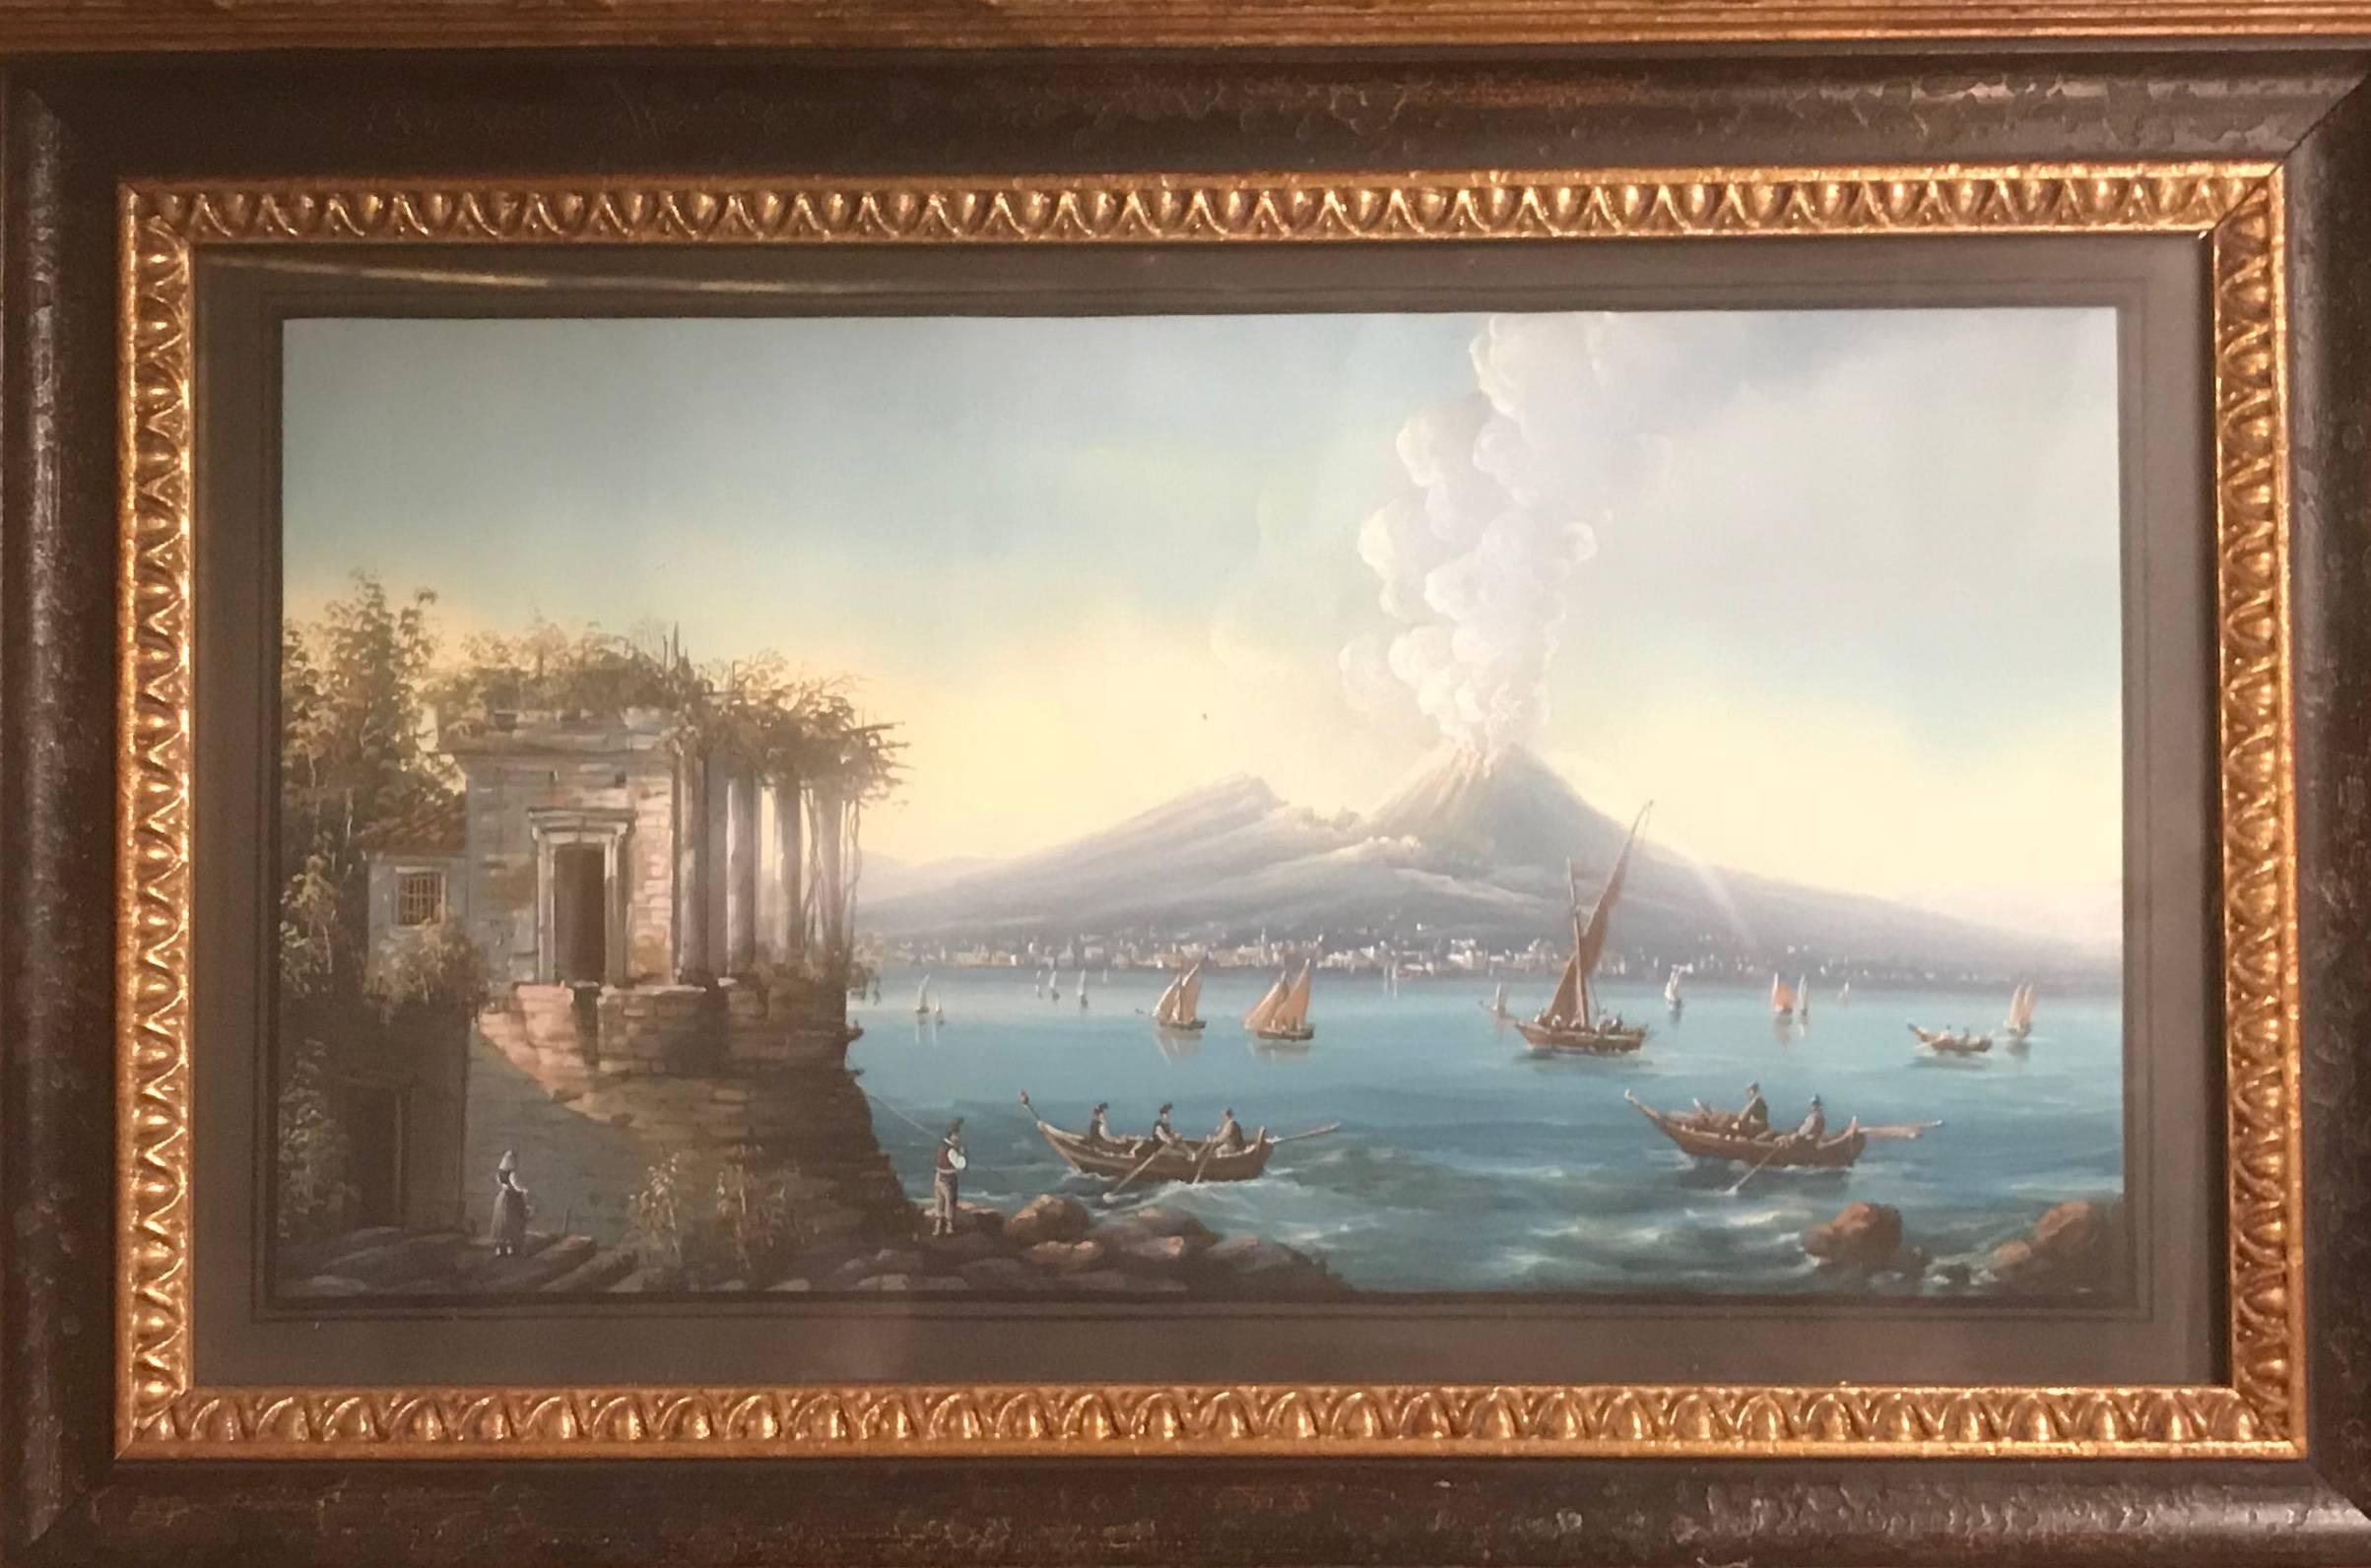 Very fine quality Grand Tour gouache showing the Bay of Naples from some ruins on shore, sailboats and fishing vessels on the water and the active volcano, Mount Vesuvius, in the background. Mounted in a gilt and ebonized neoclassical style frame.